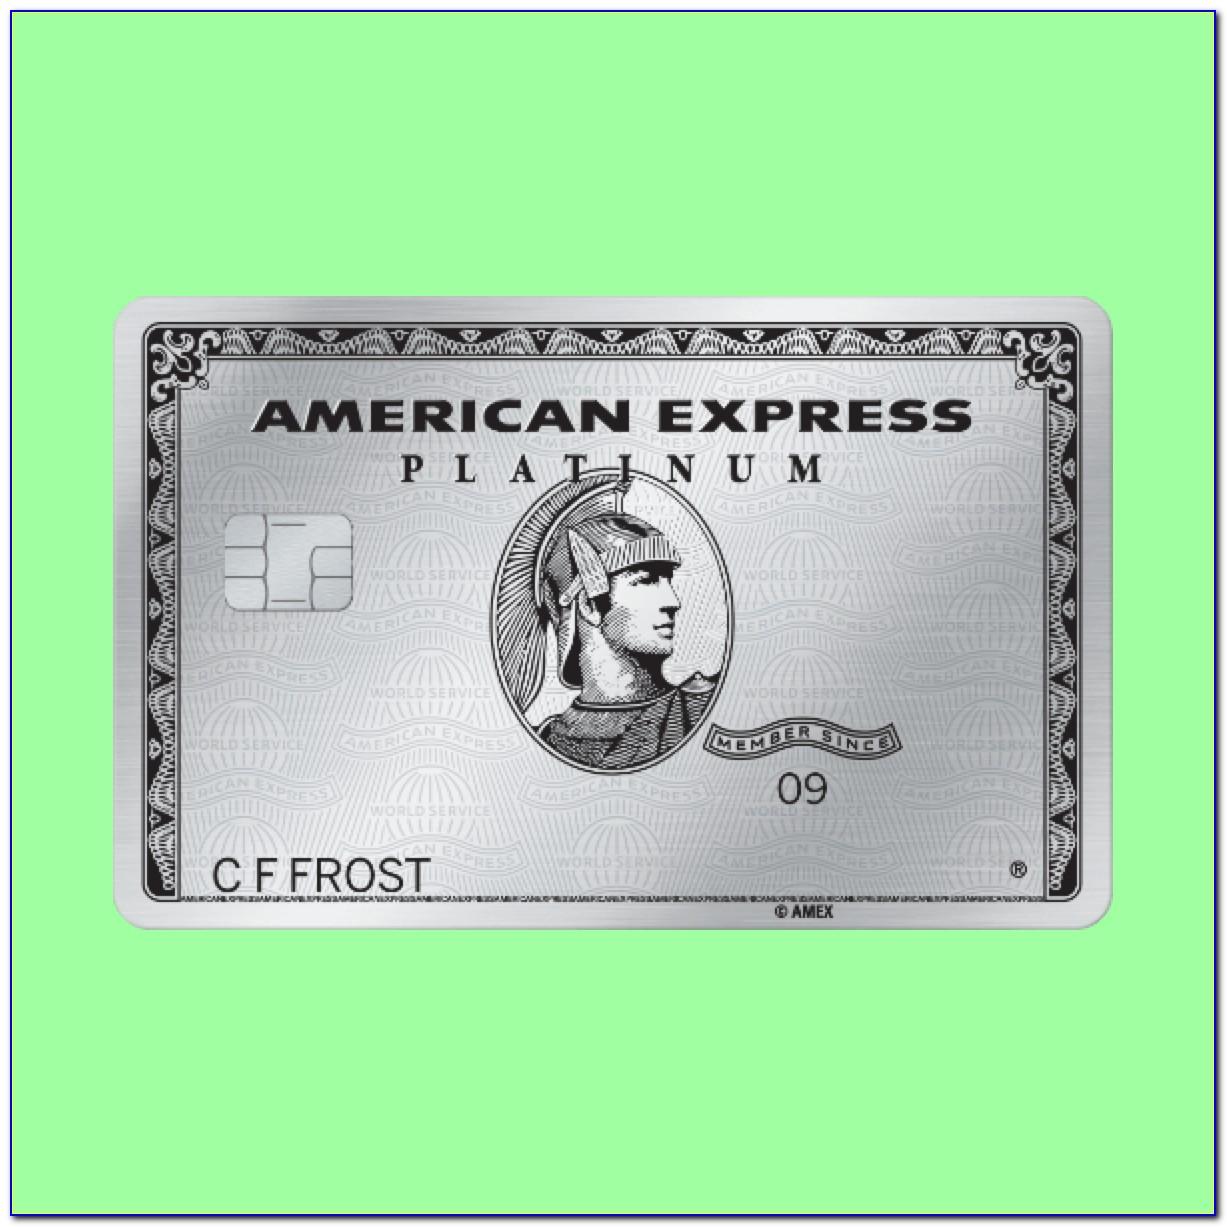 Amex Business Gold Card Metal